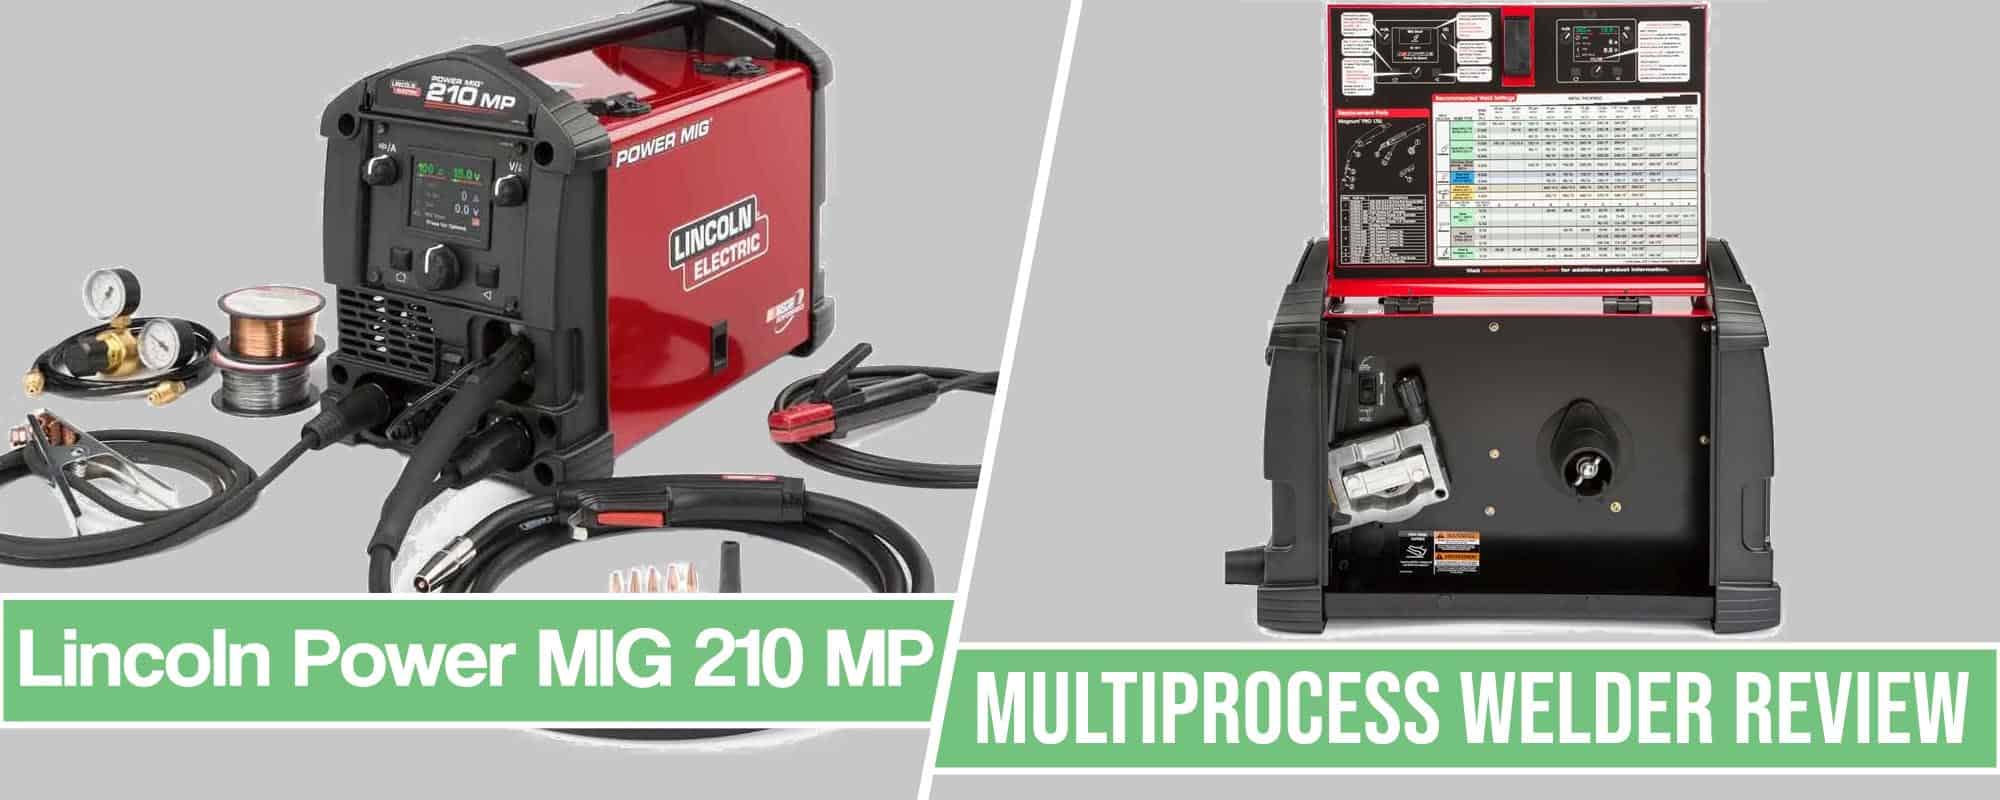 Power MIG 210 MP Review of the Most Popular Lincoln Welder